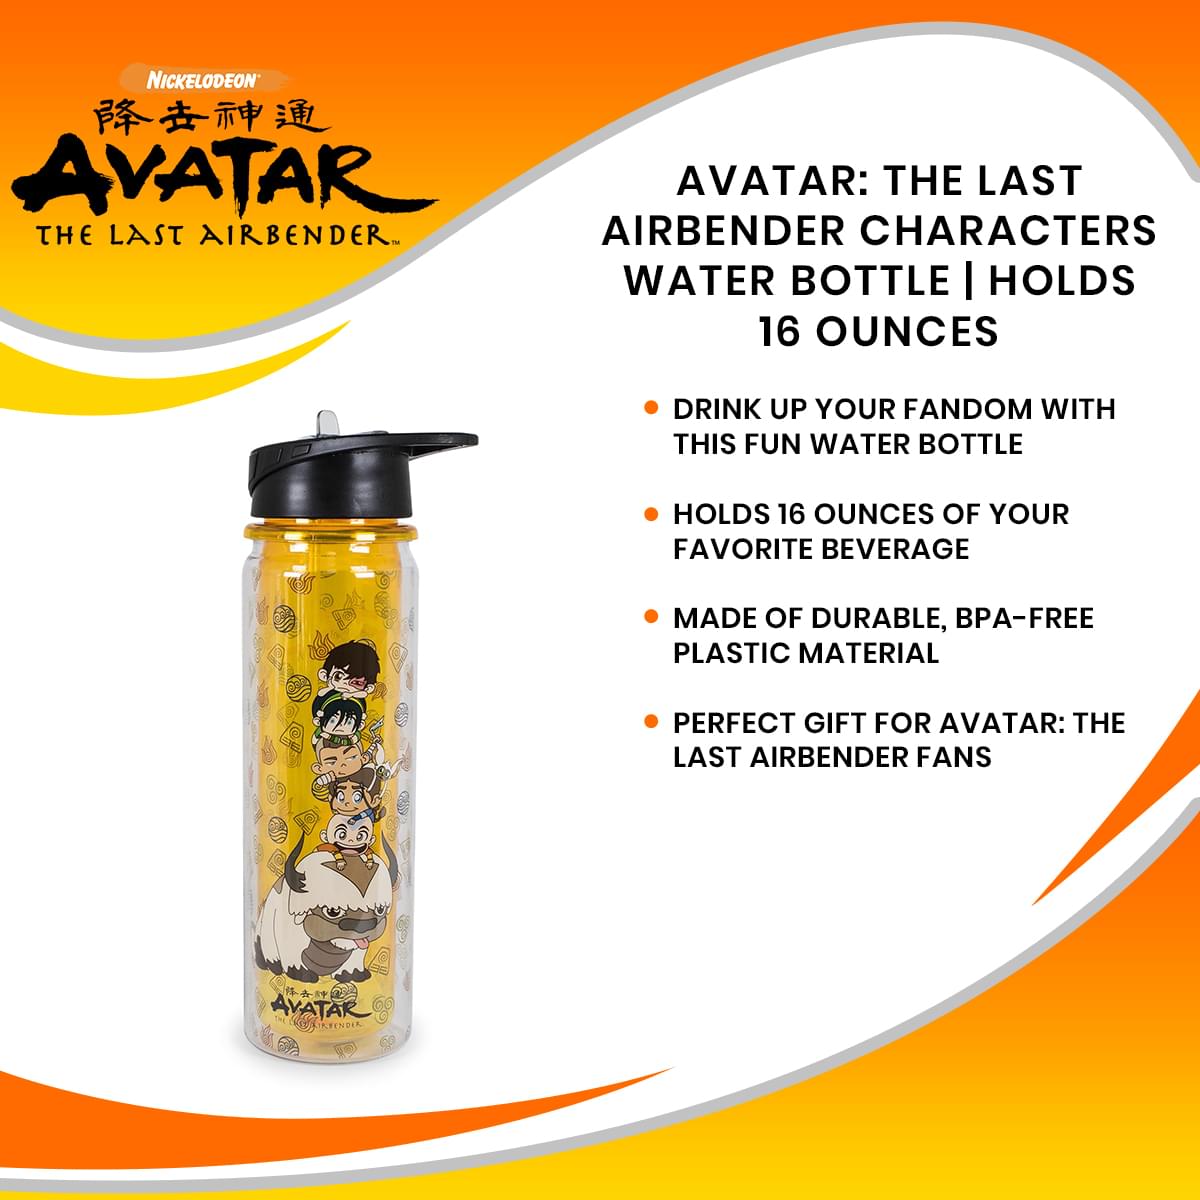 Avatar: The Last Airbender Characters Water Bottle | Holds 16 Ounces